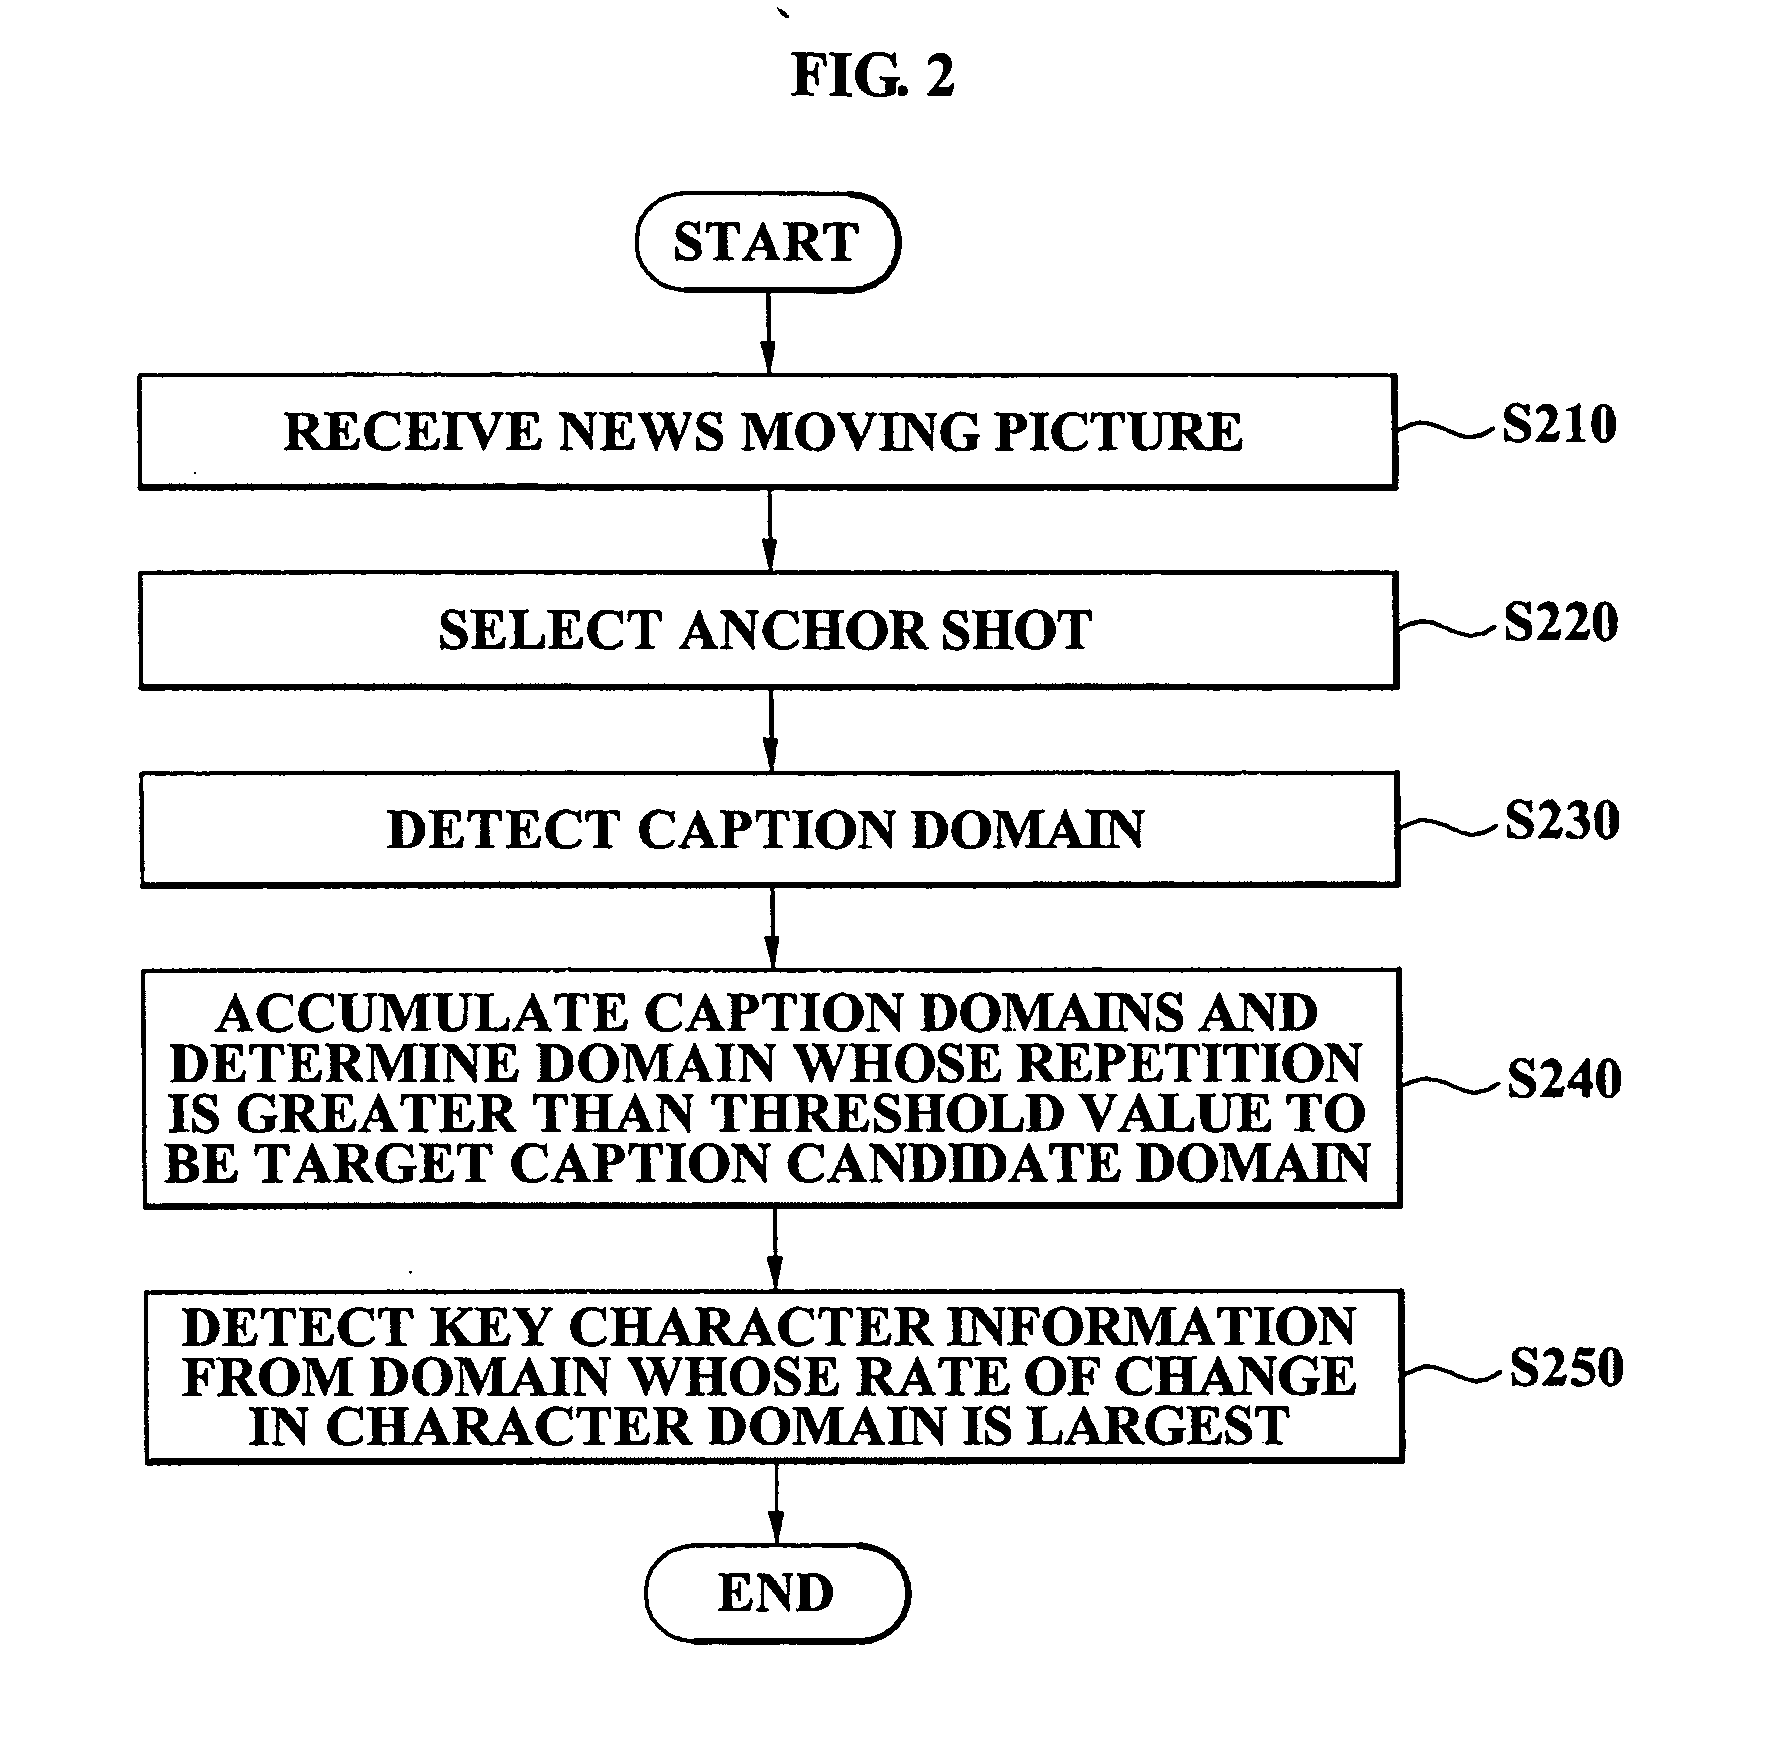 Apparatus and method for detecting key caption from moving picture to provide customized broadcast service